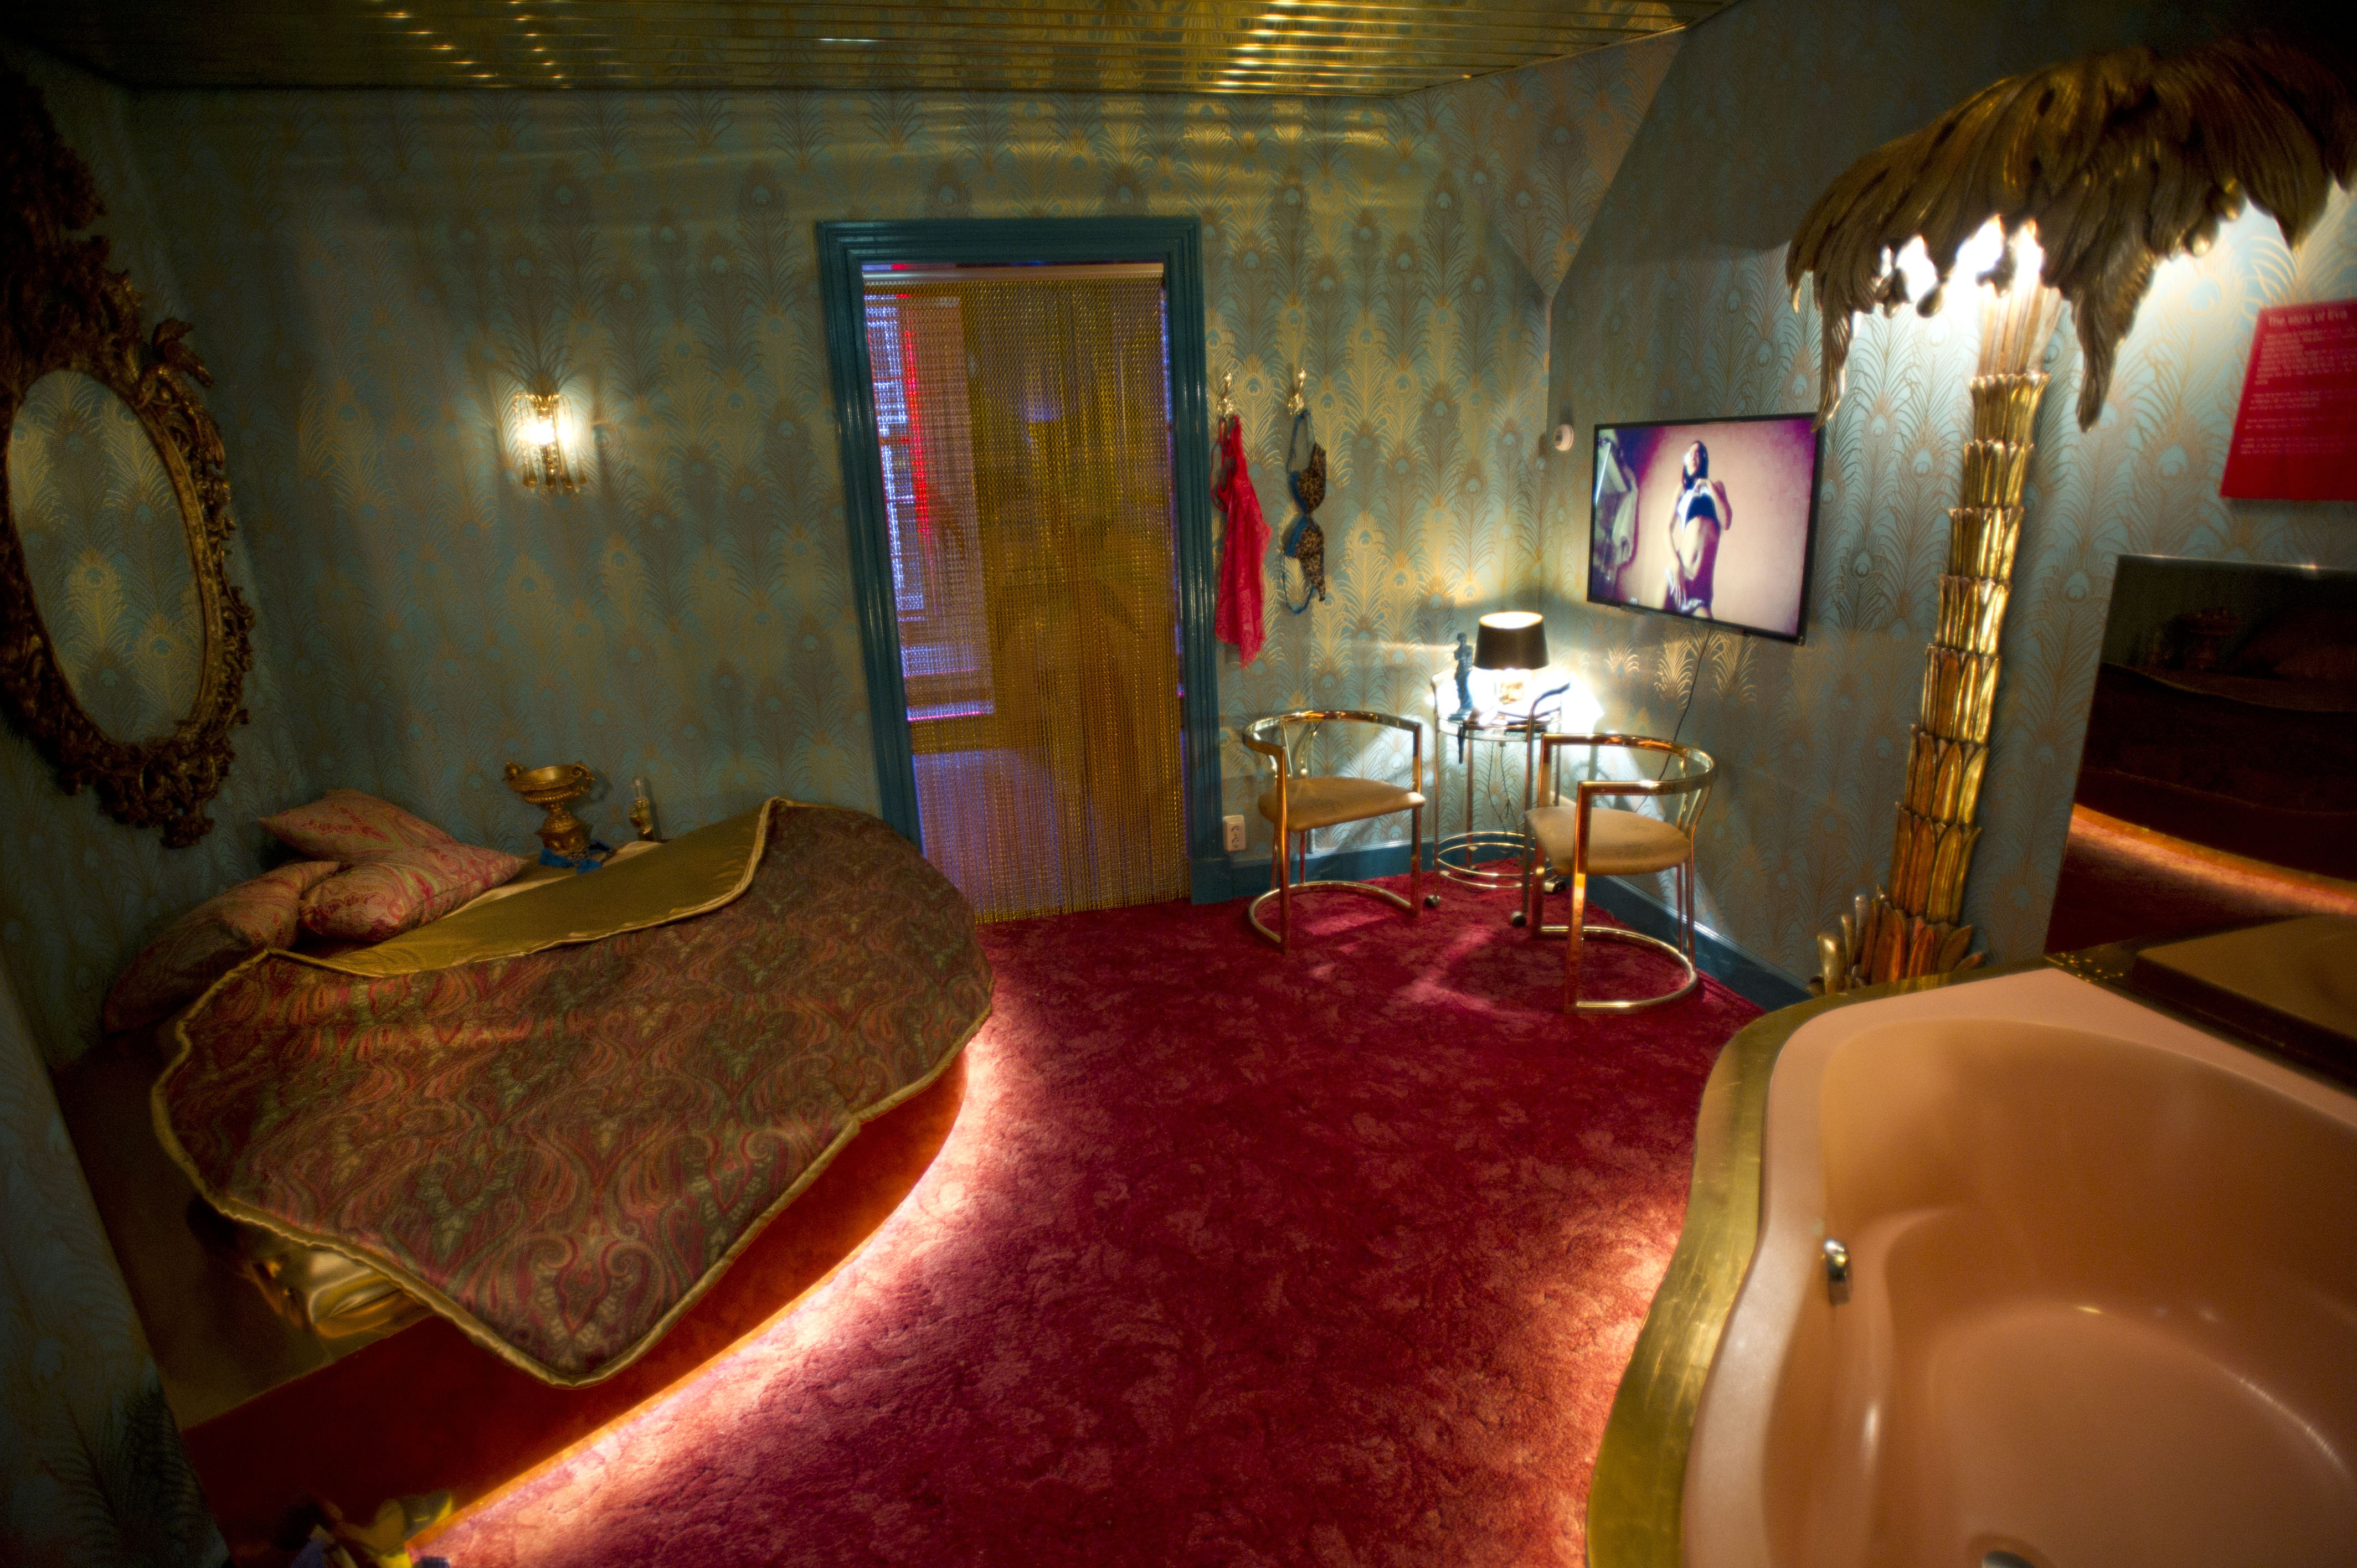 Amsterdam - Amsterdam's prostitution museum - Pictures - CBS News